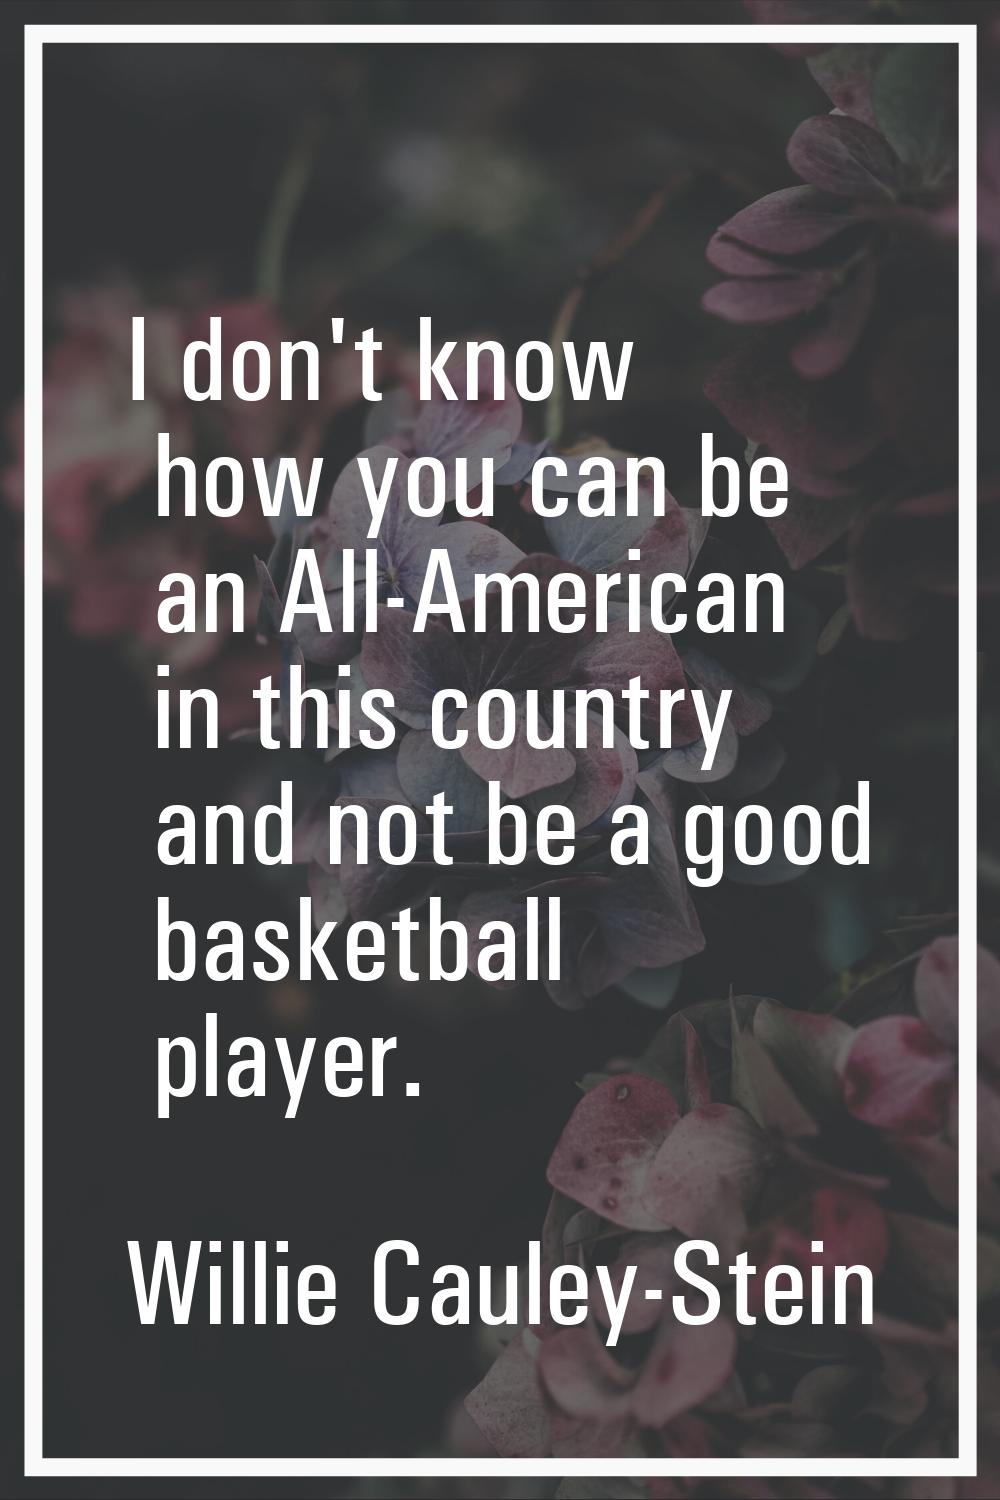 I don't know how you can be an All-American in this country and not be a good basketball player.